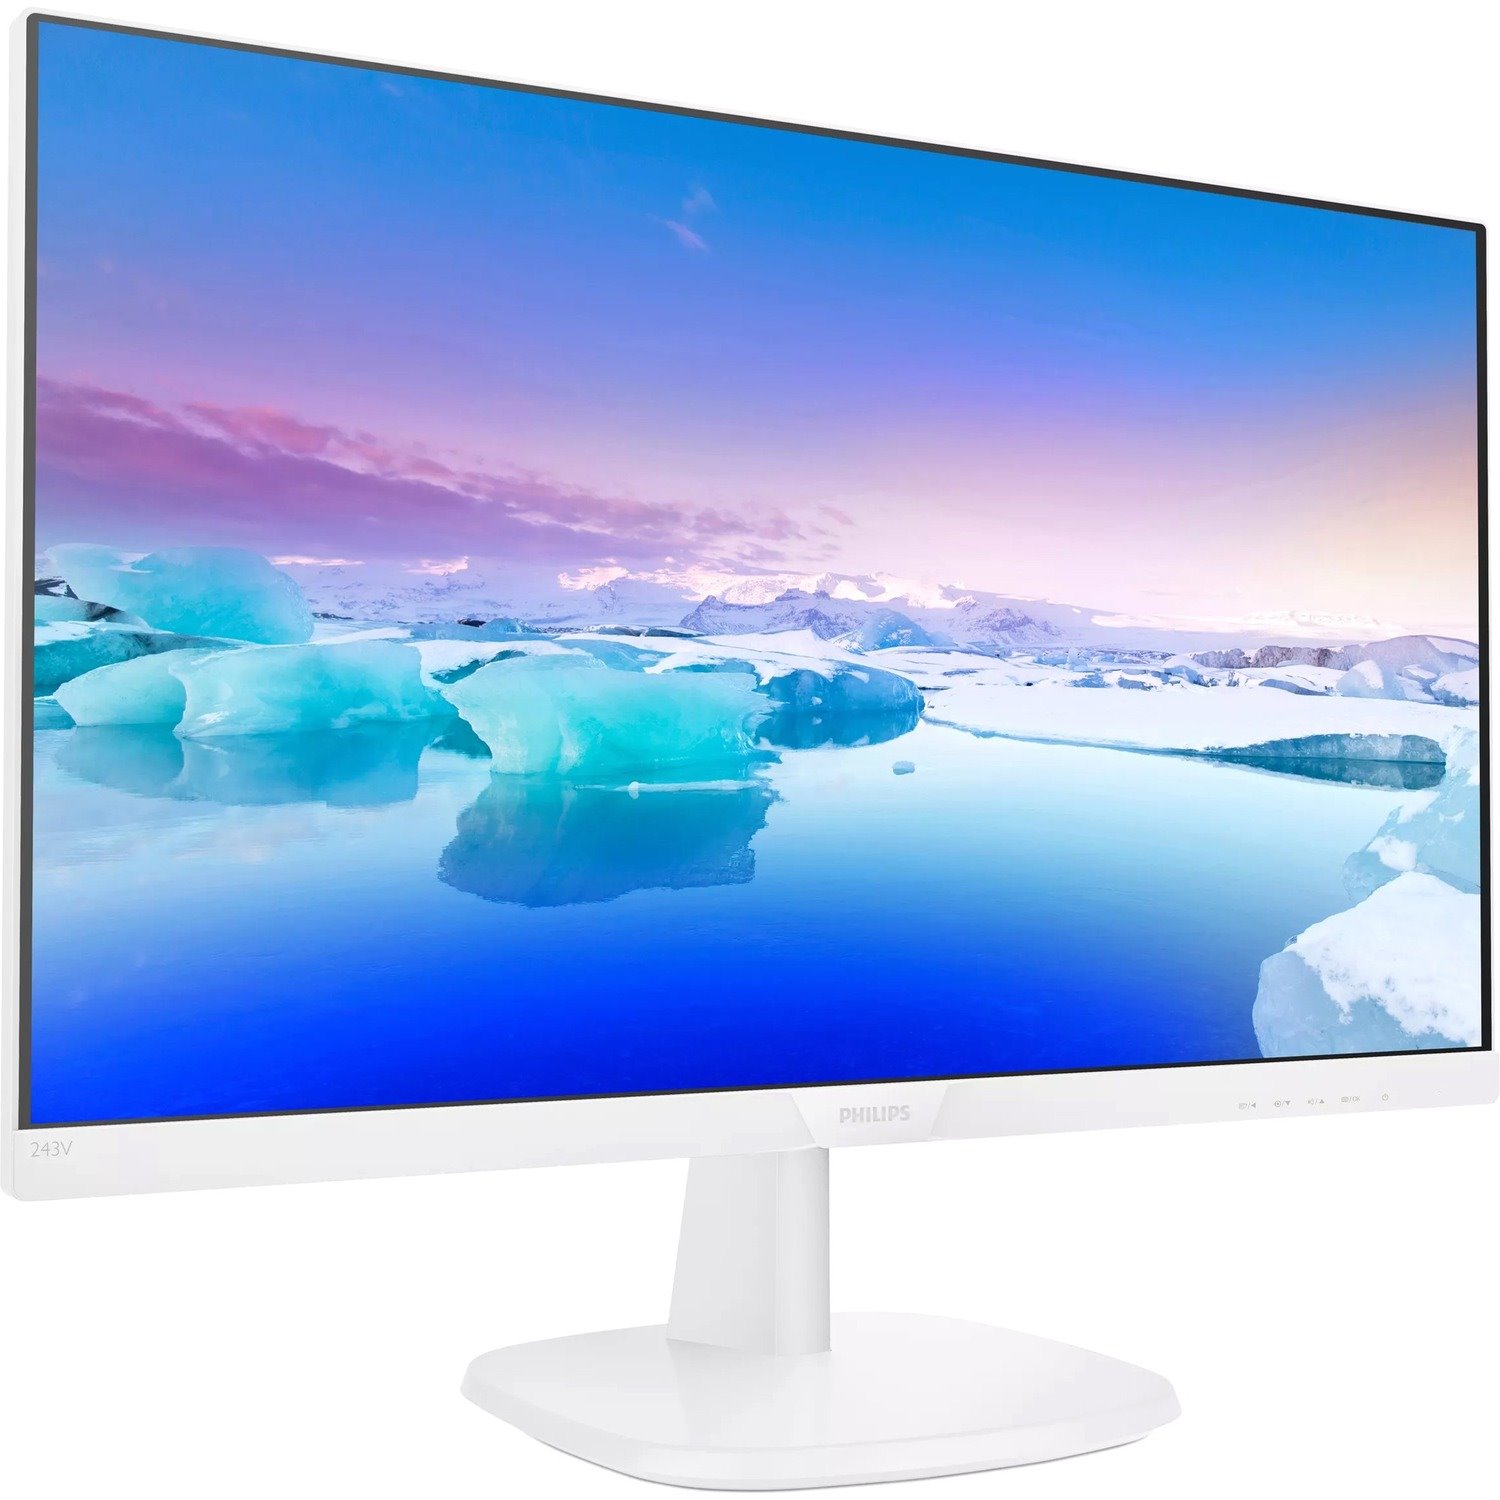 Philips 243V7QDAW 23.8" Full HD WLED LCD Monitor - 16:9 - Textured White